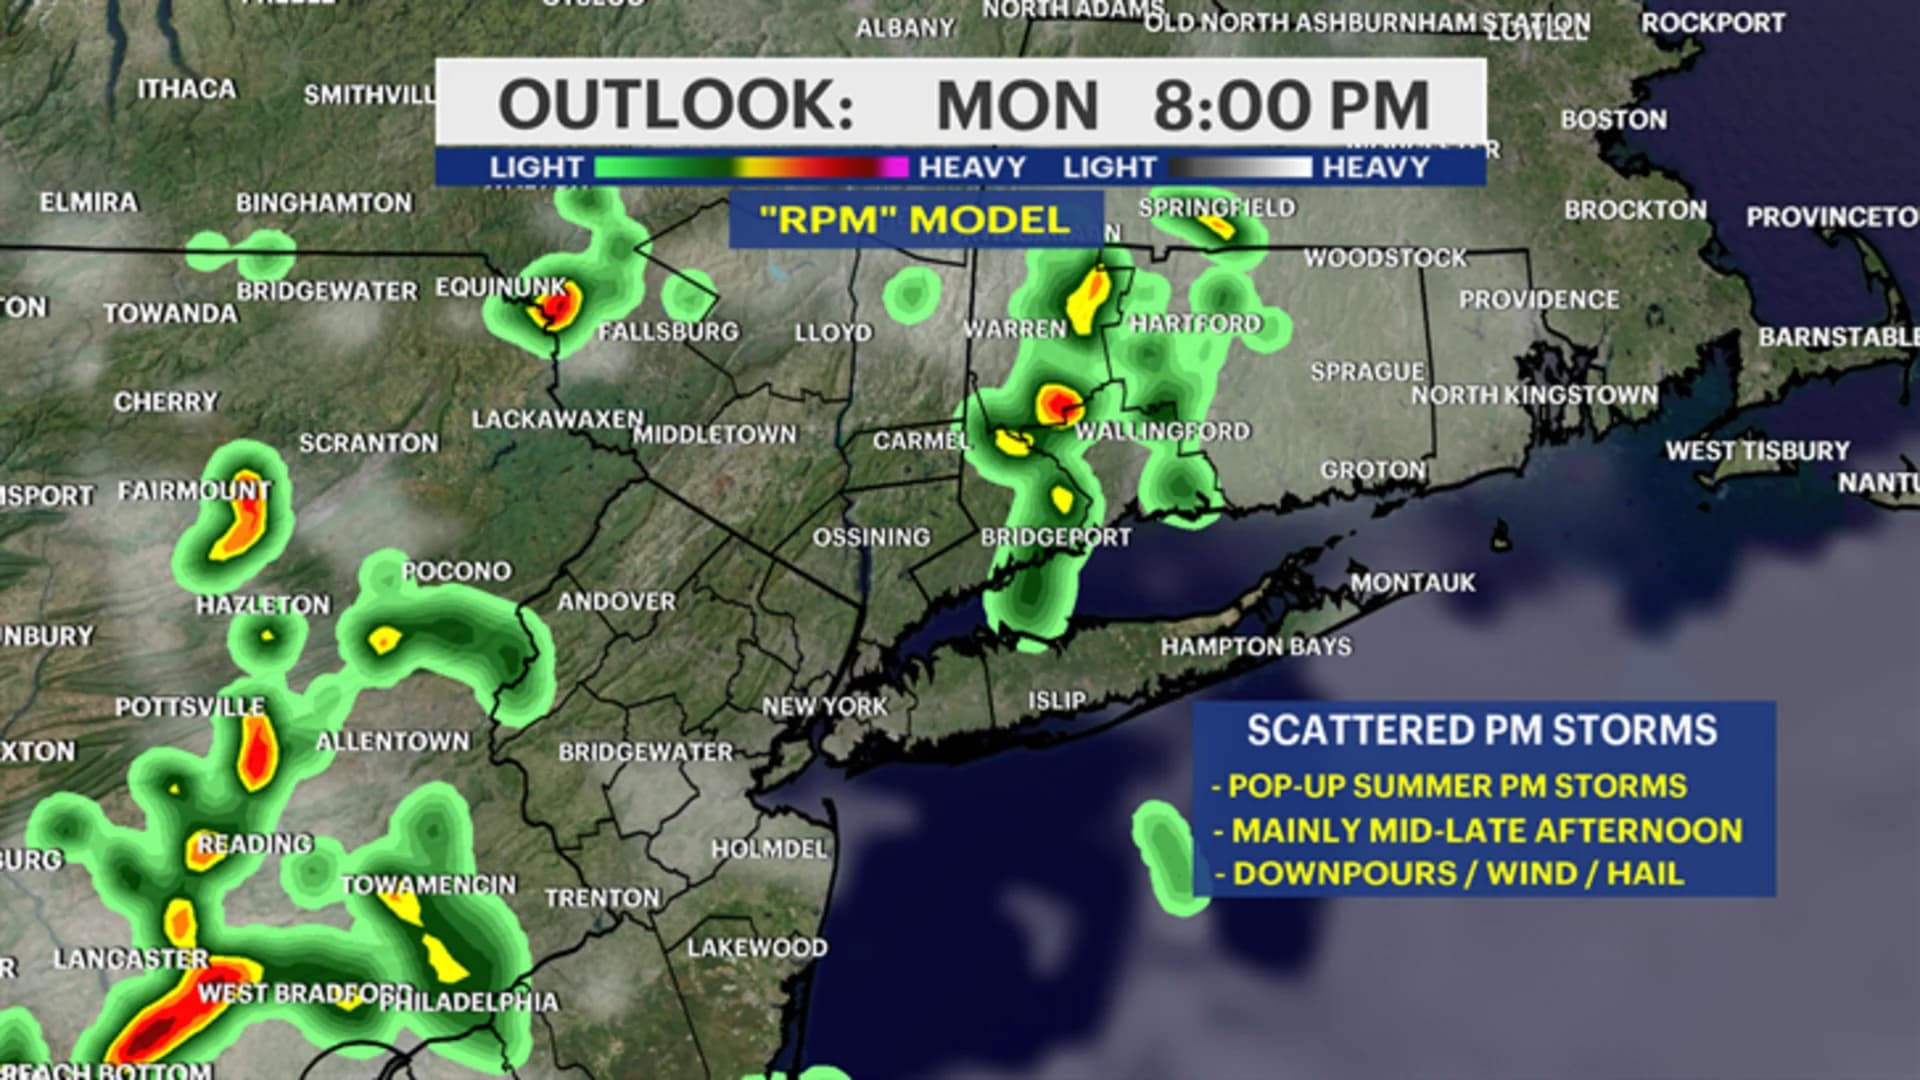 Scattered storms pose risk for lower Hudson Valley